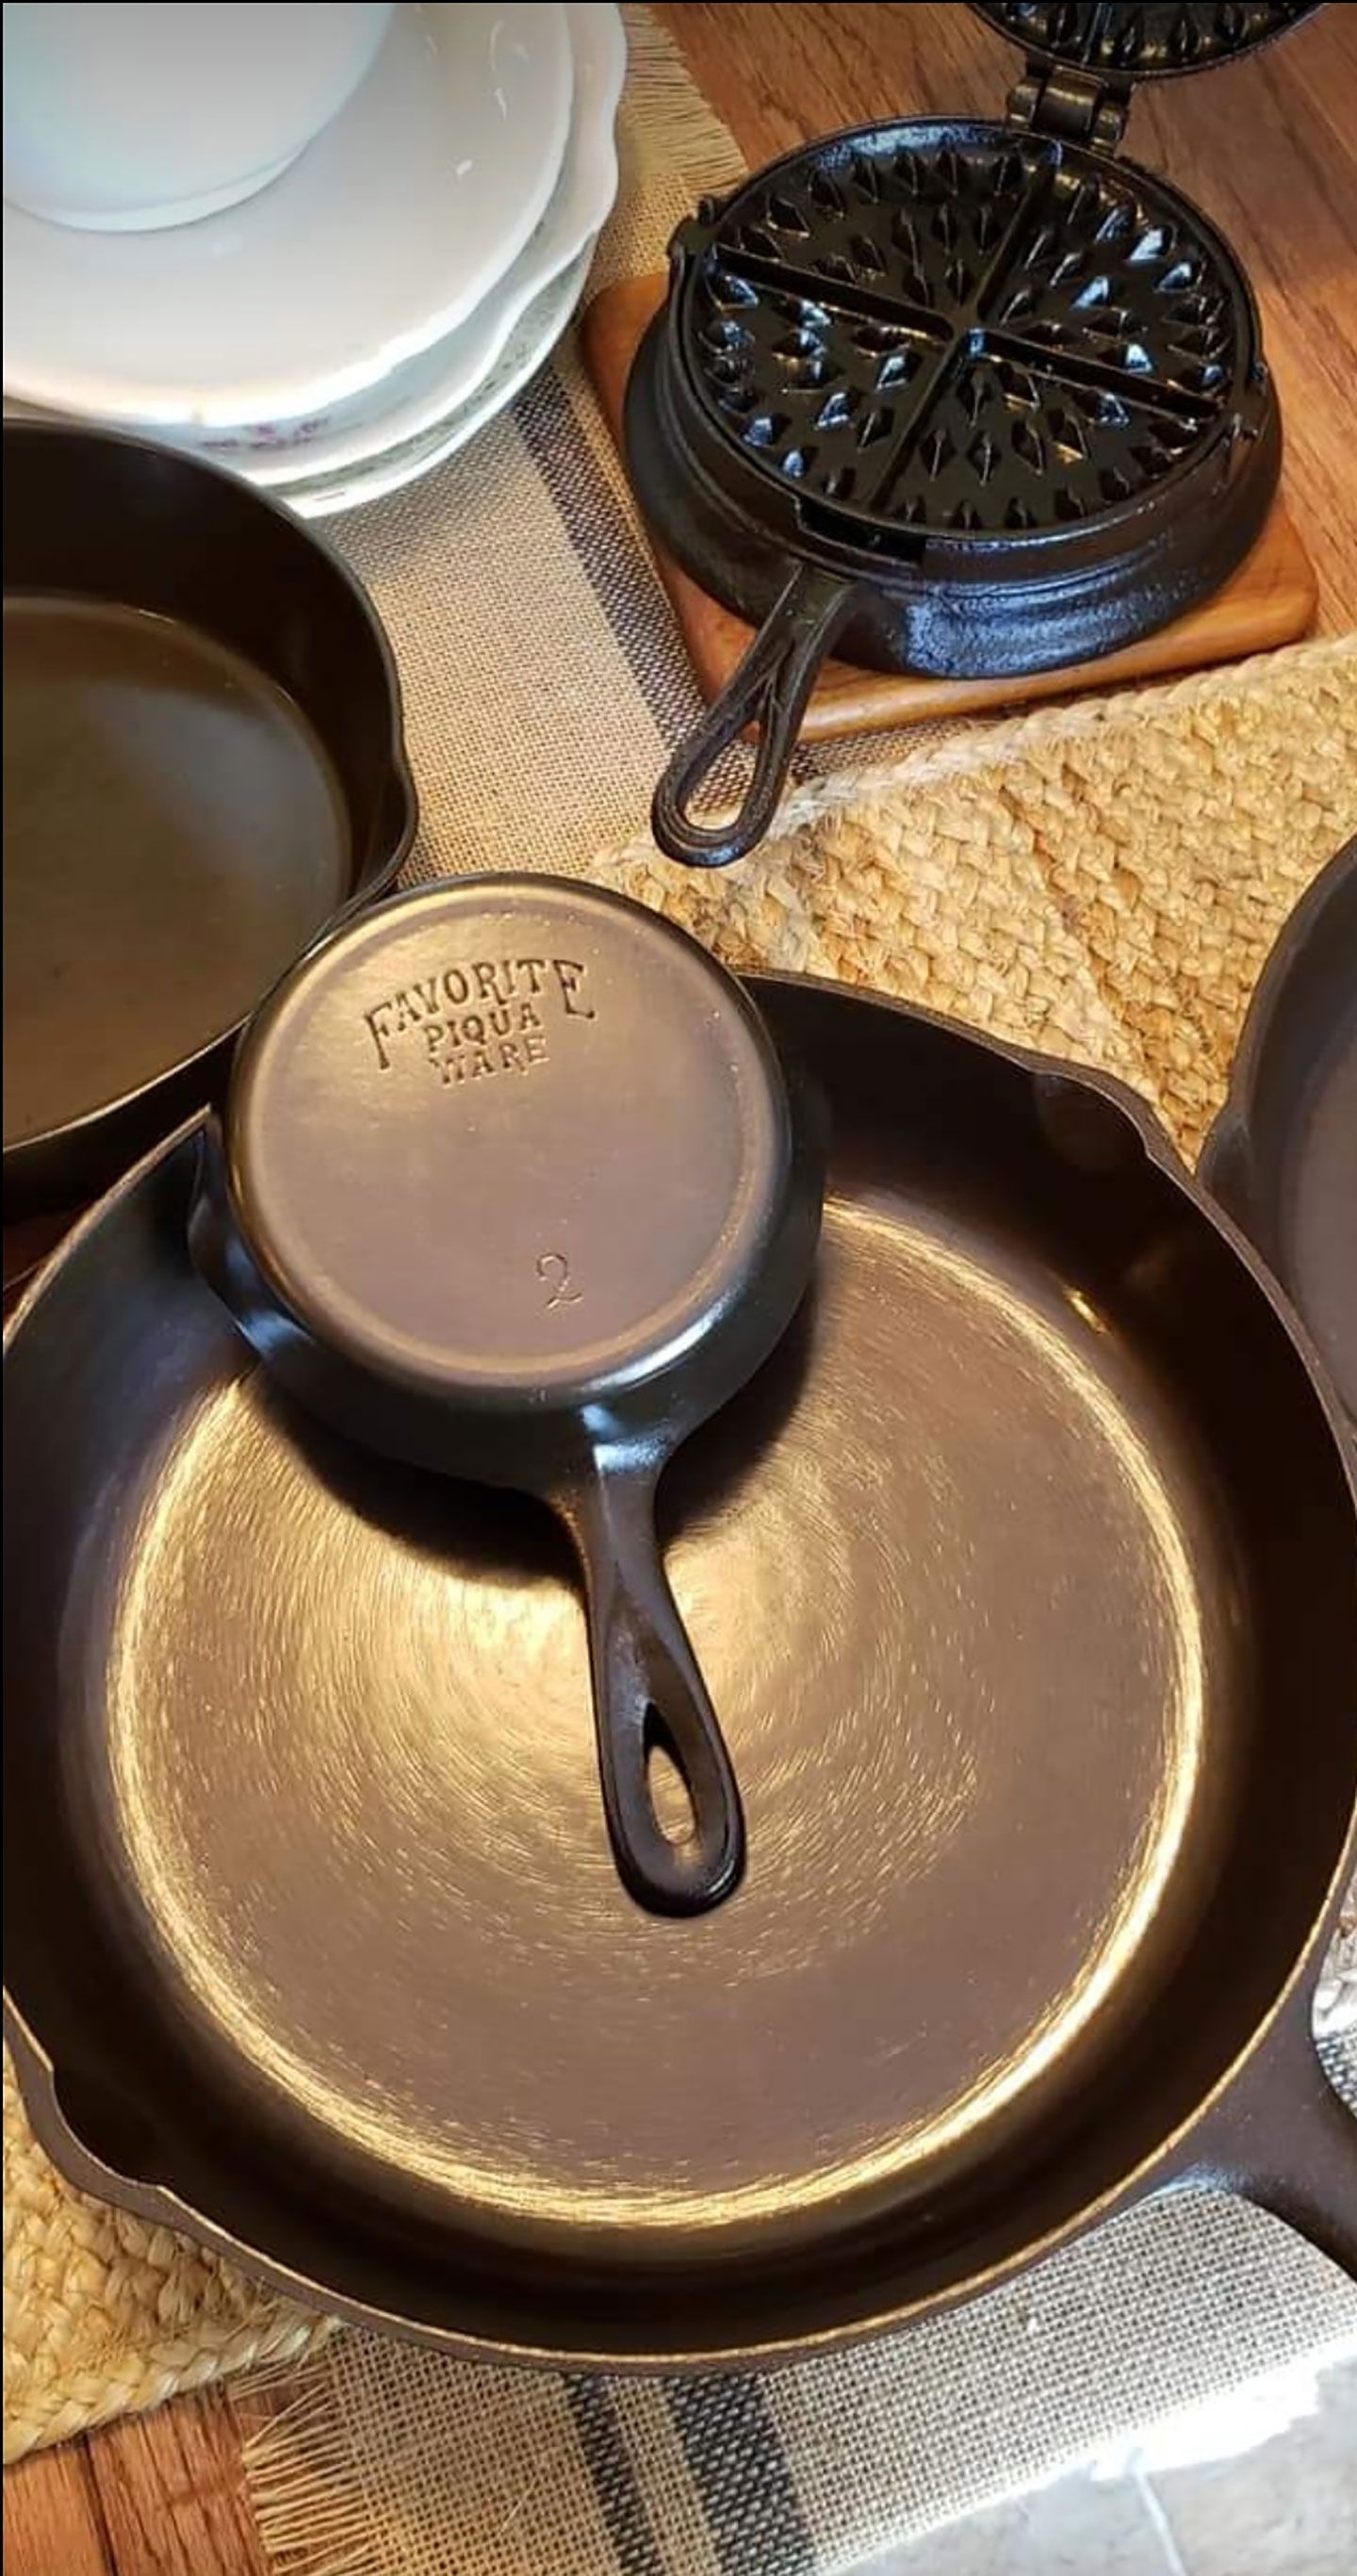 Griswold Cast Iron Skillets Simple Identification Guide.